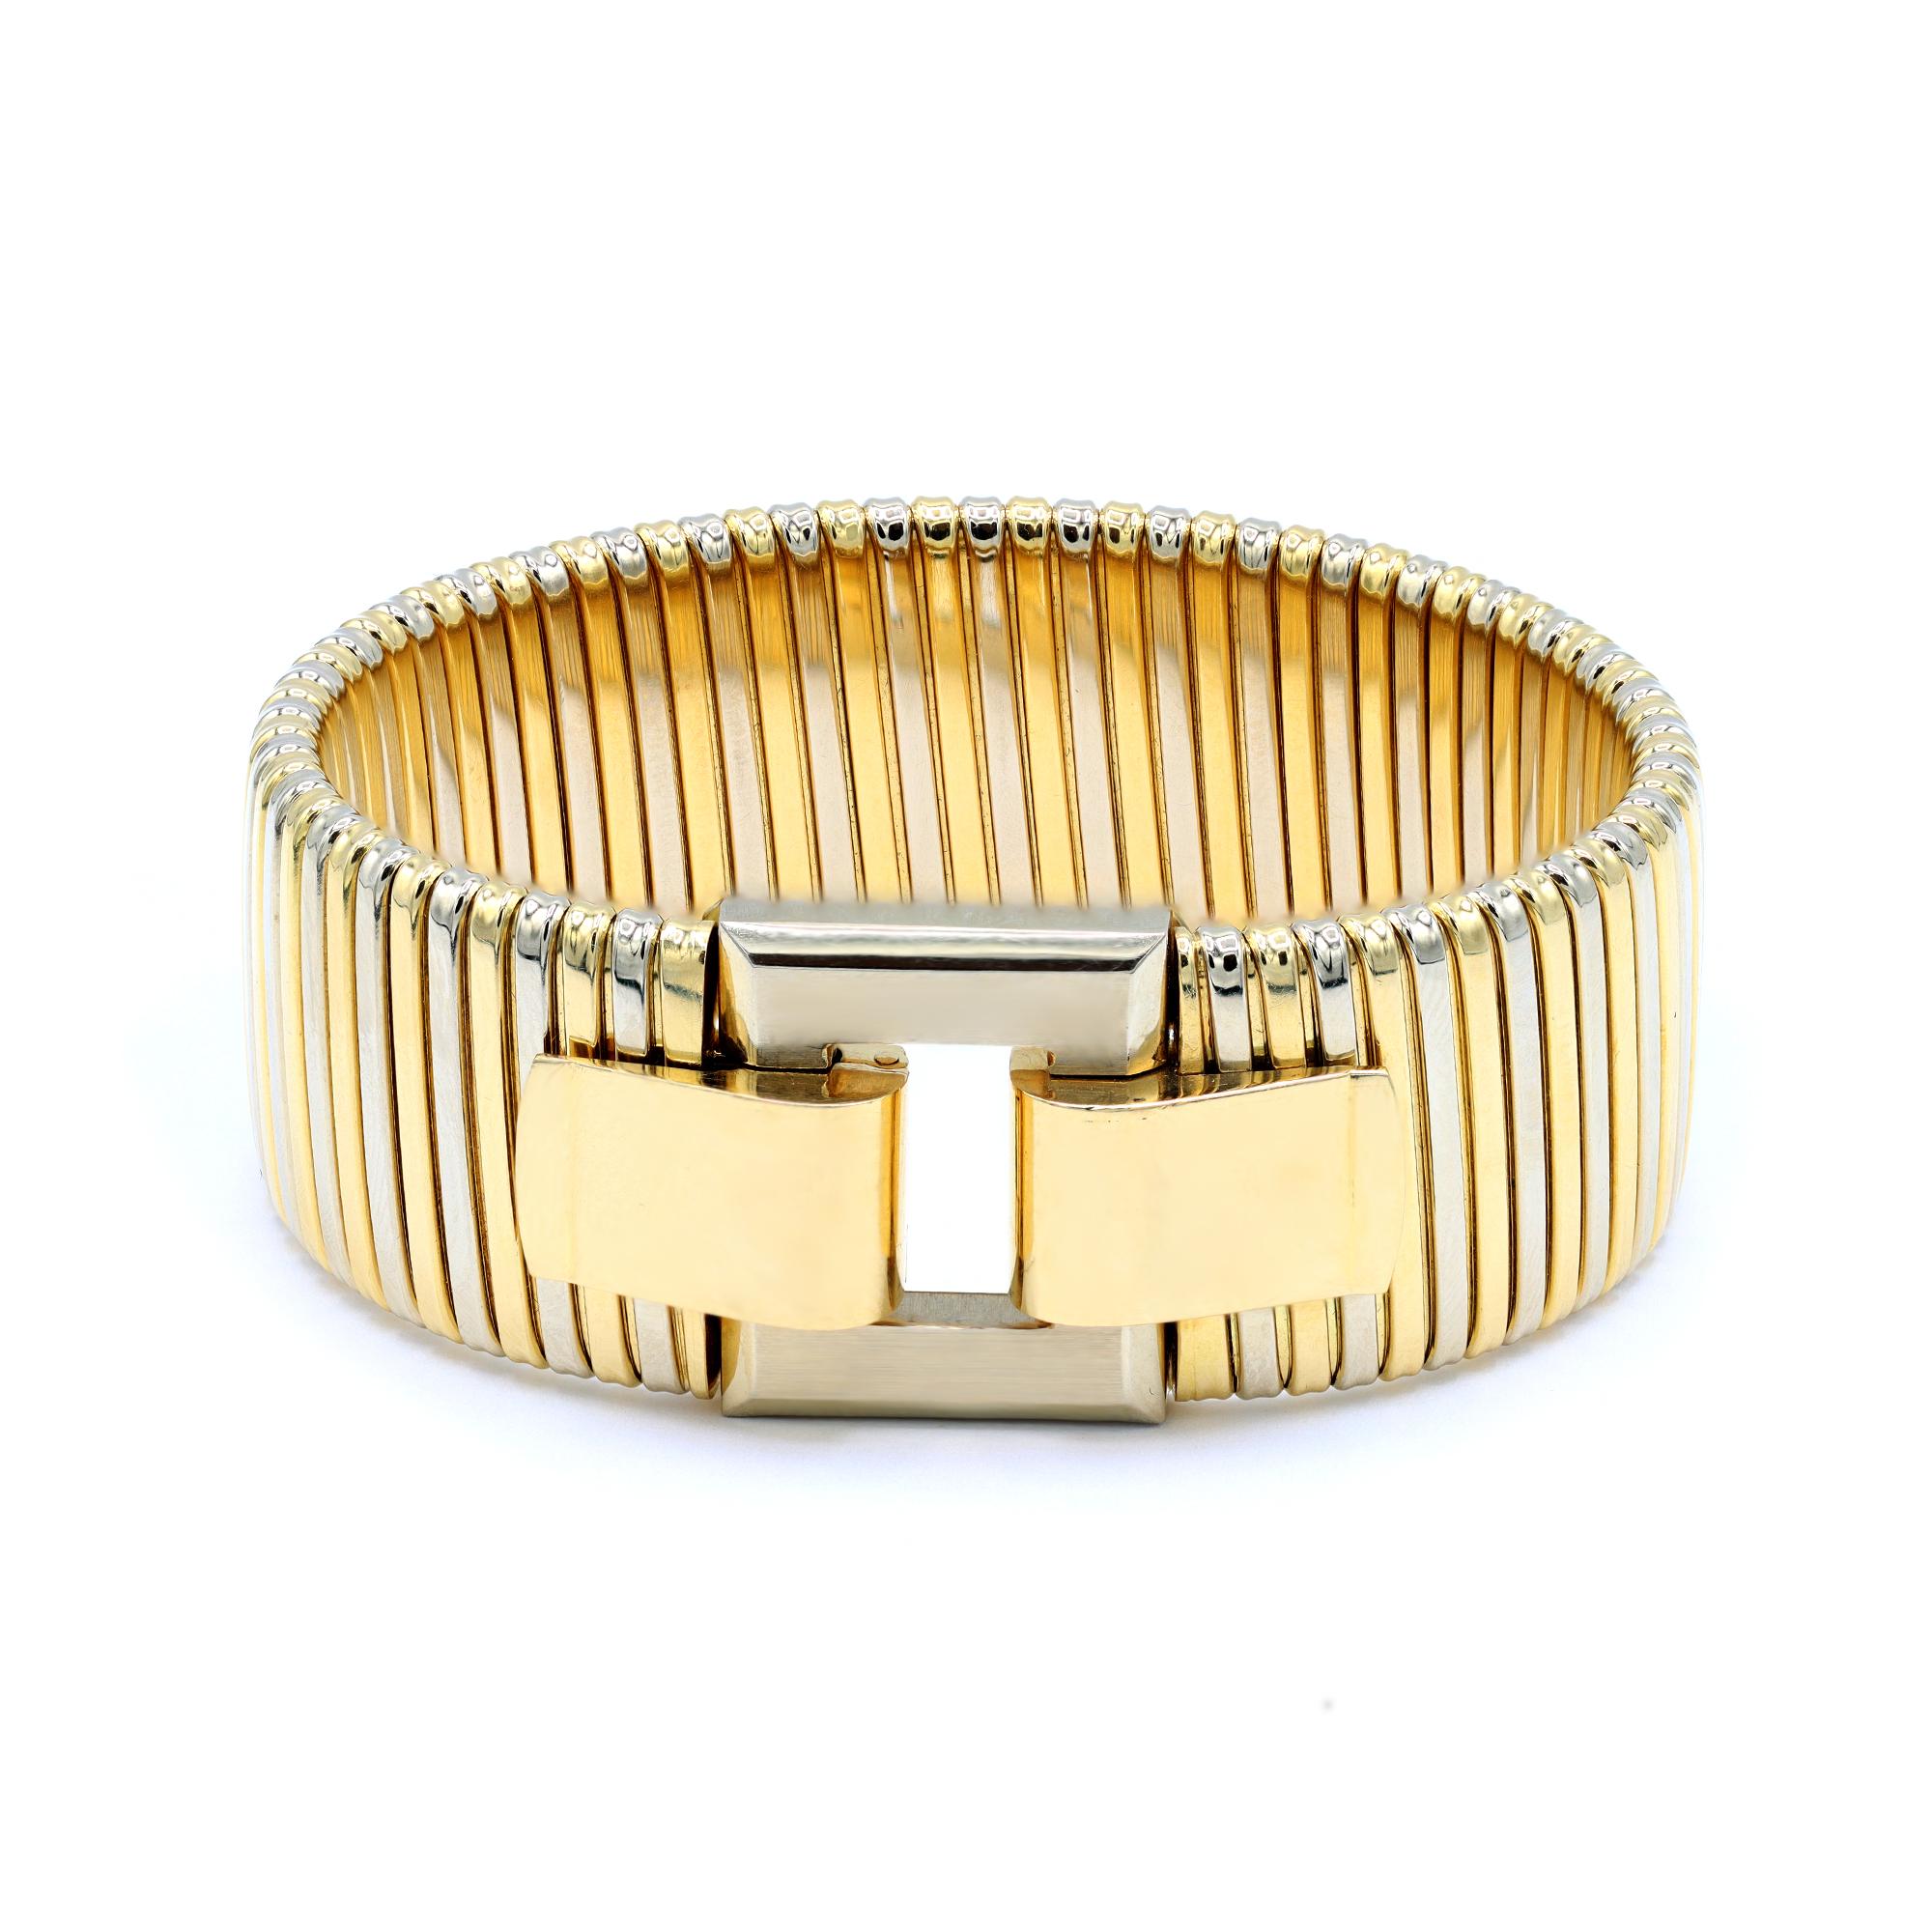 A vintage Tubogas style bangle bracelet originated in Italy circa 1980. The bracelet is made in two tone 18 karat yellow and white gold and closes with an elegant buckle and it is stamped with hallmarks. The gross weight of the bracelet is 79.2